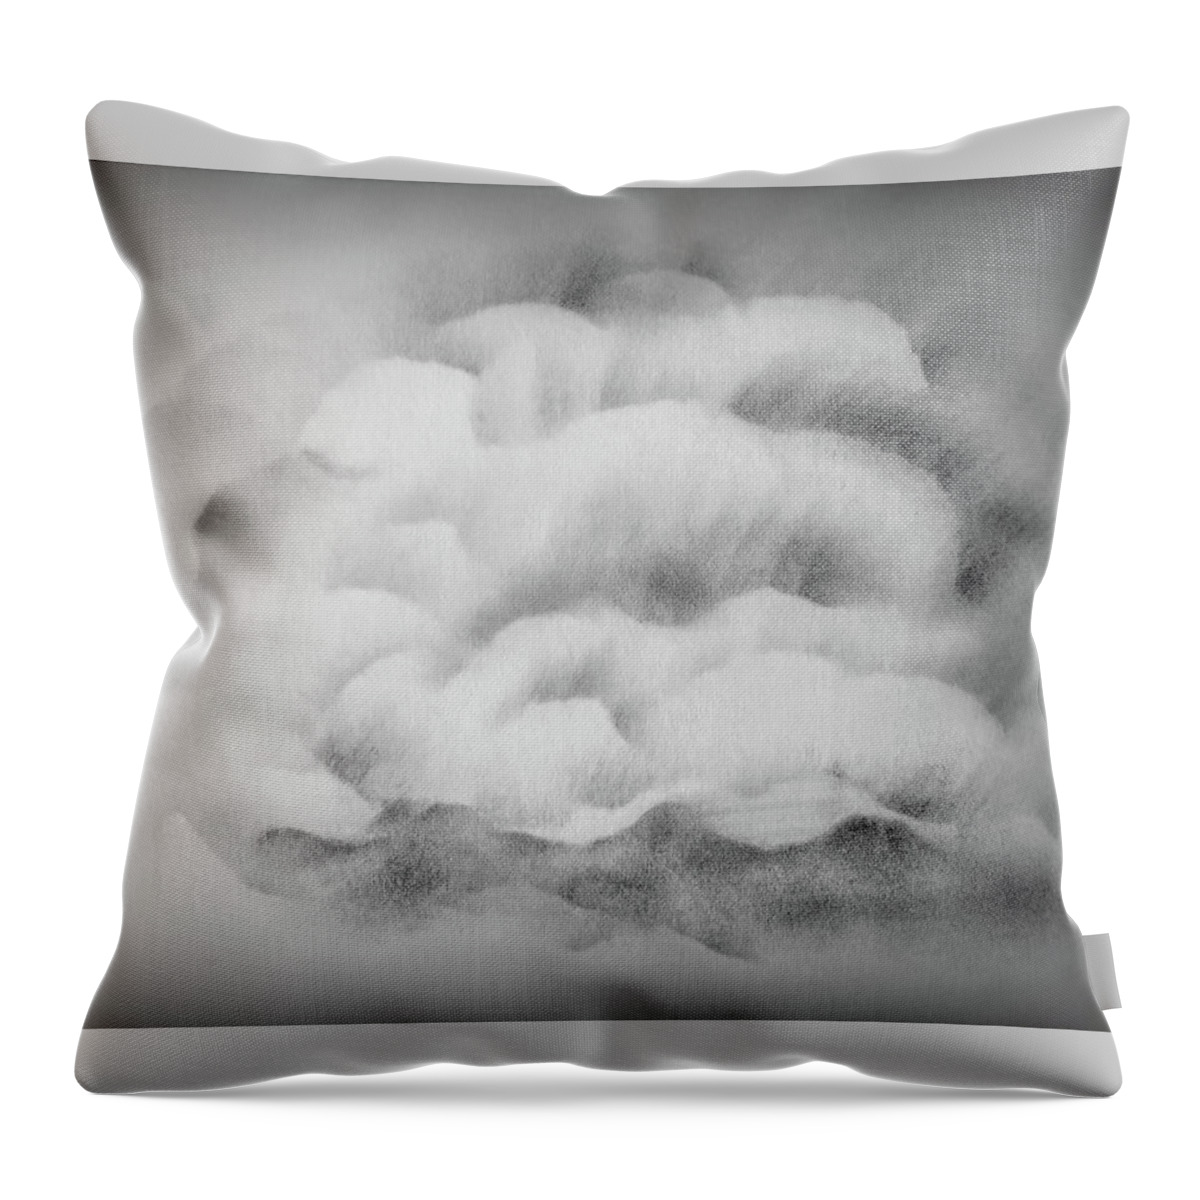 Cumulus Cloud Throw Pillow featuring the drawing Thunderhead Above by Deborah League